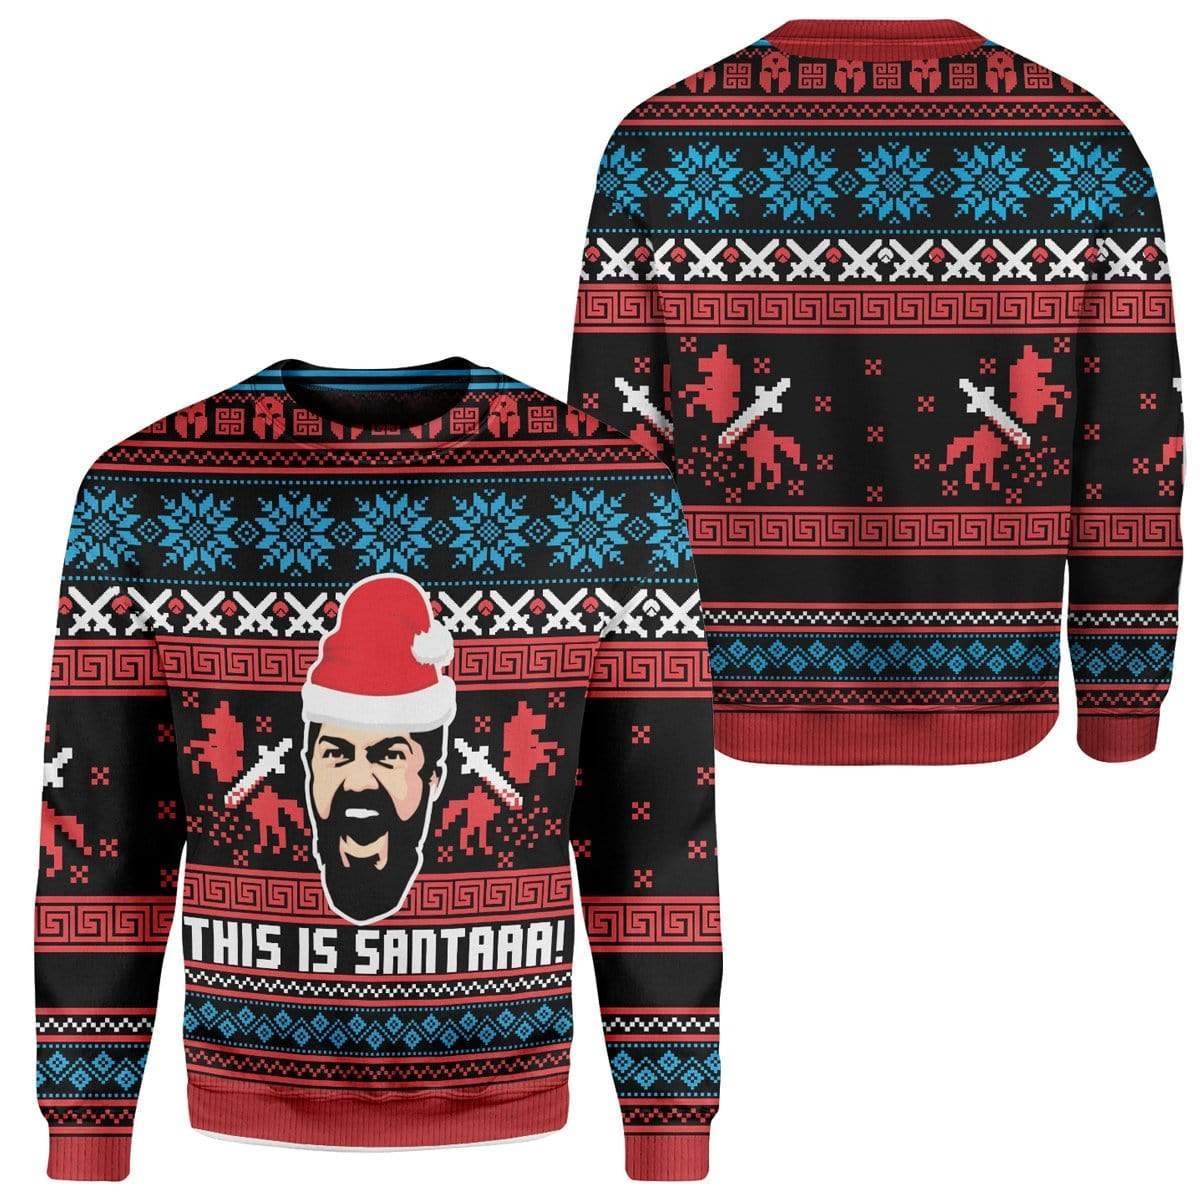 Custom Ugly This Is Sata Christmas Sweater Jumper HD-AT19101918 Ugly Christmas Sweater 